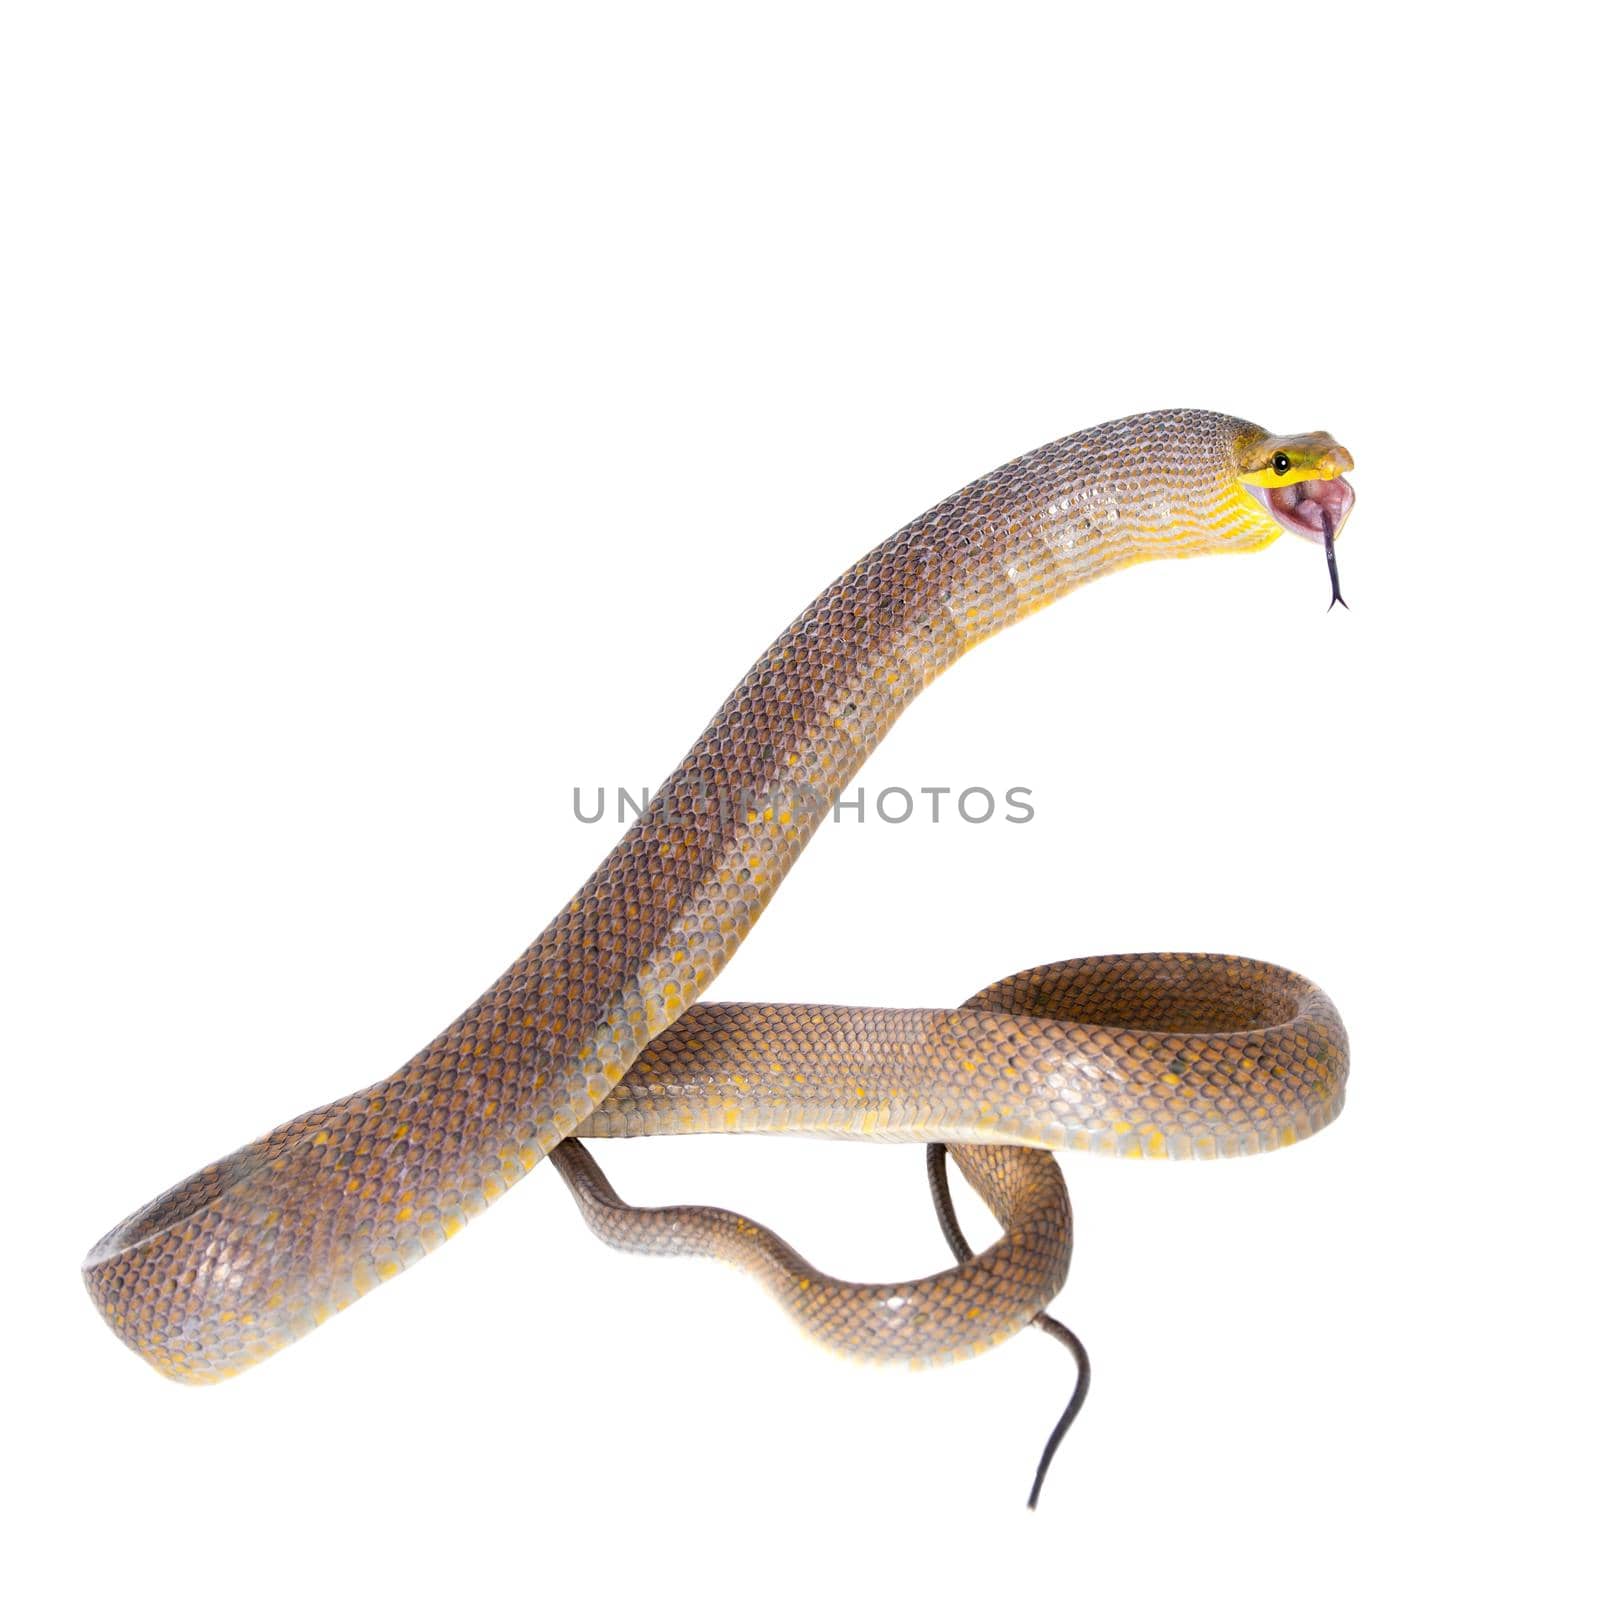 Red-tailed Green Ratsnake on the white background by RosaJay